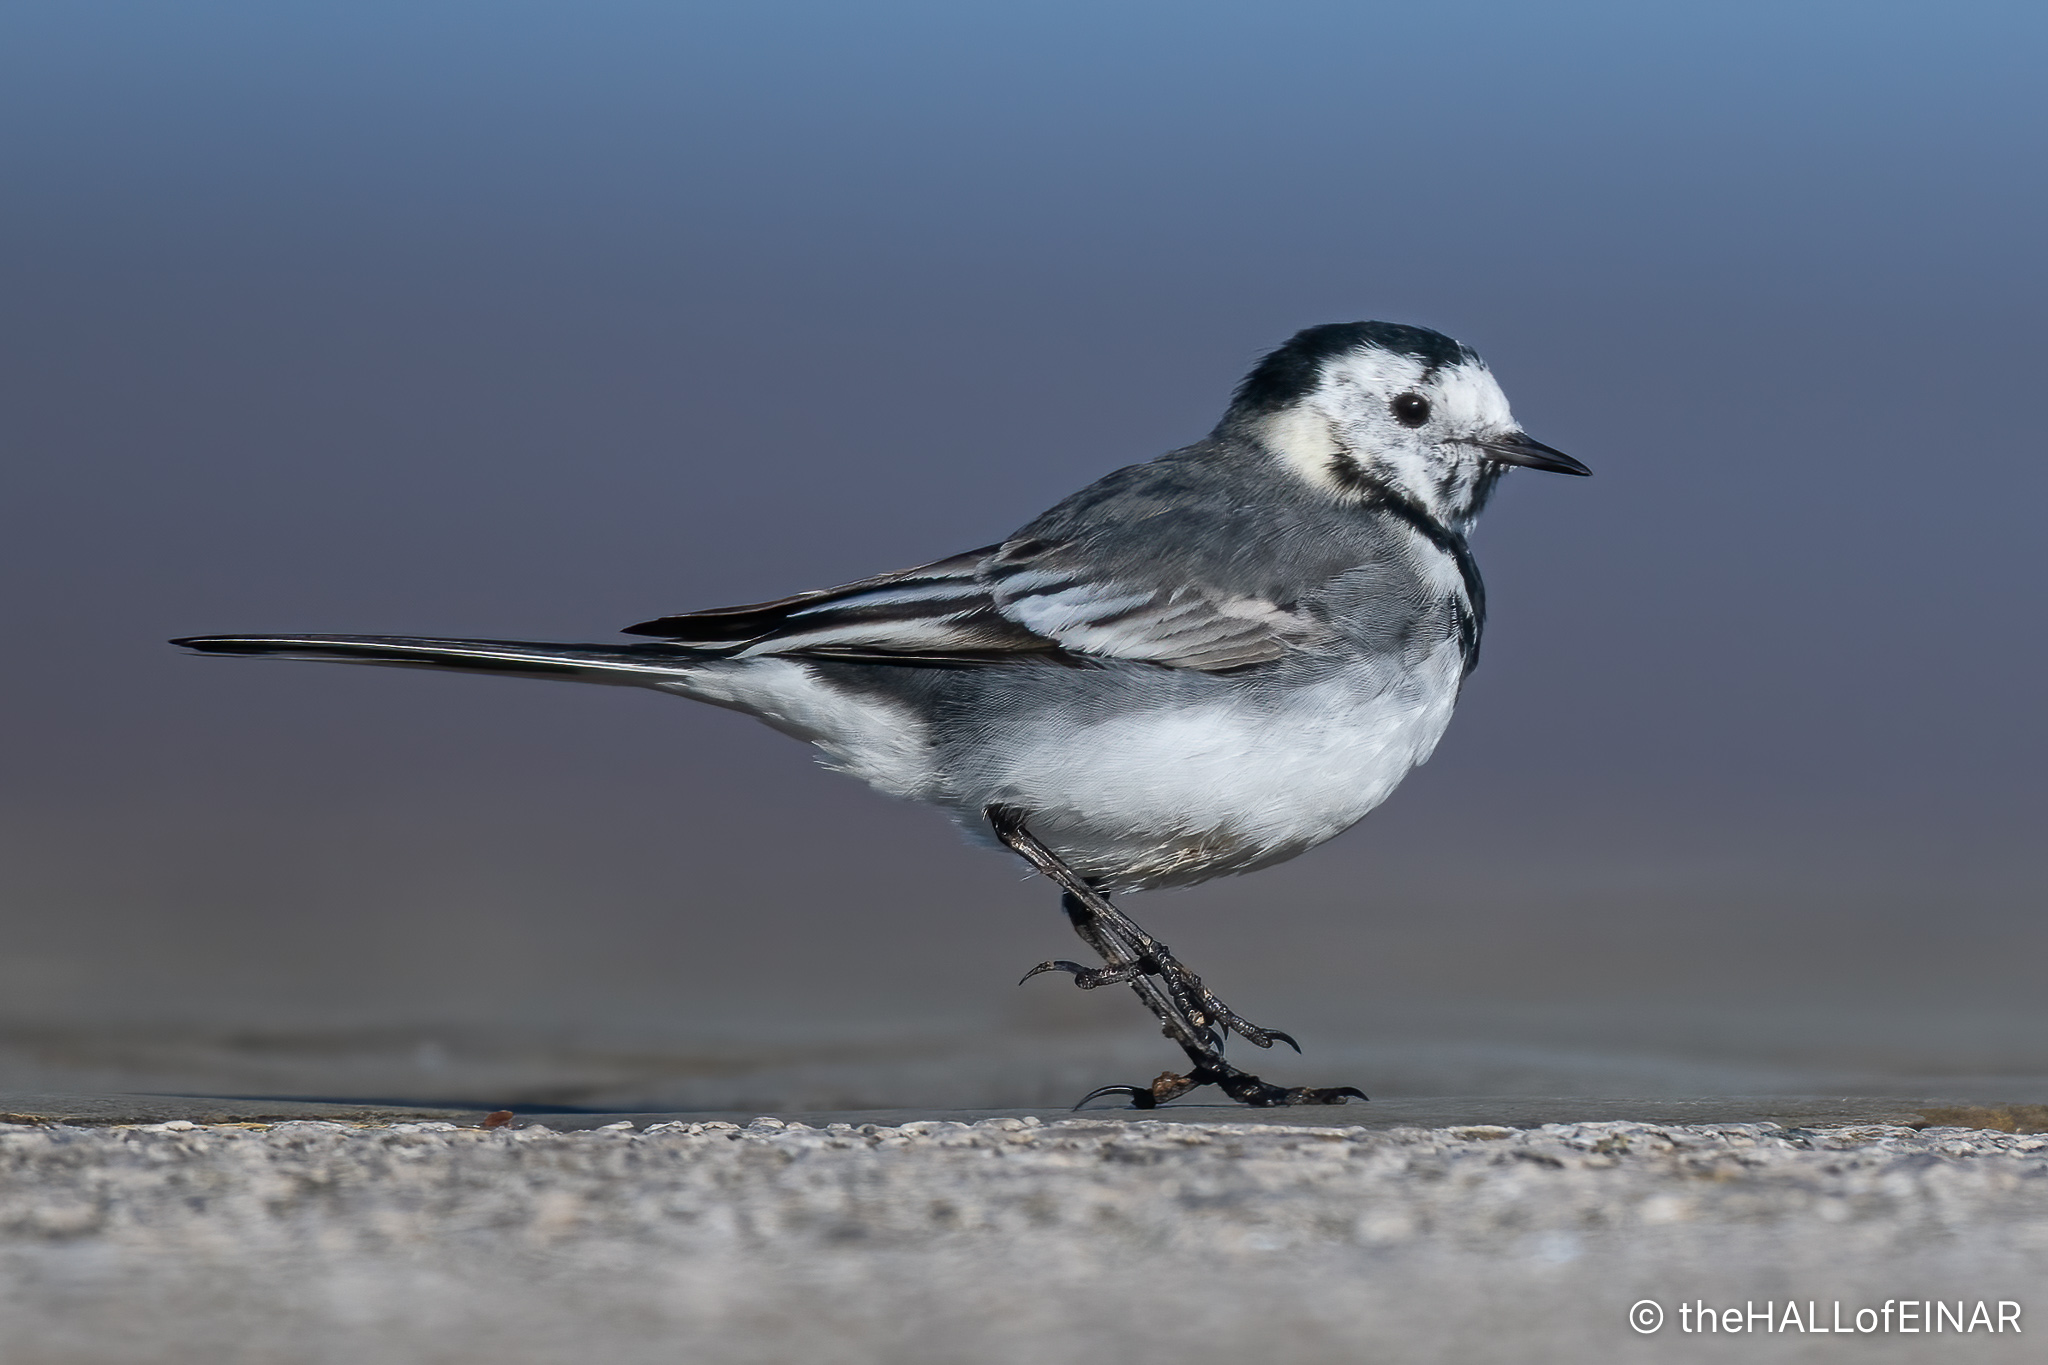 Pied Wagtail – David at the HALL of EINAR